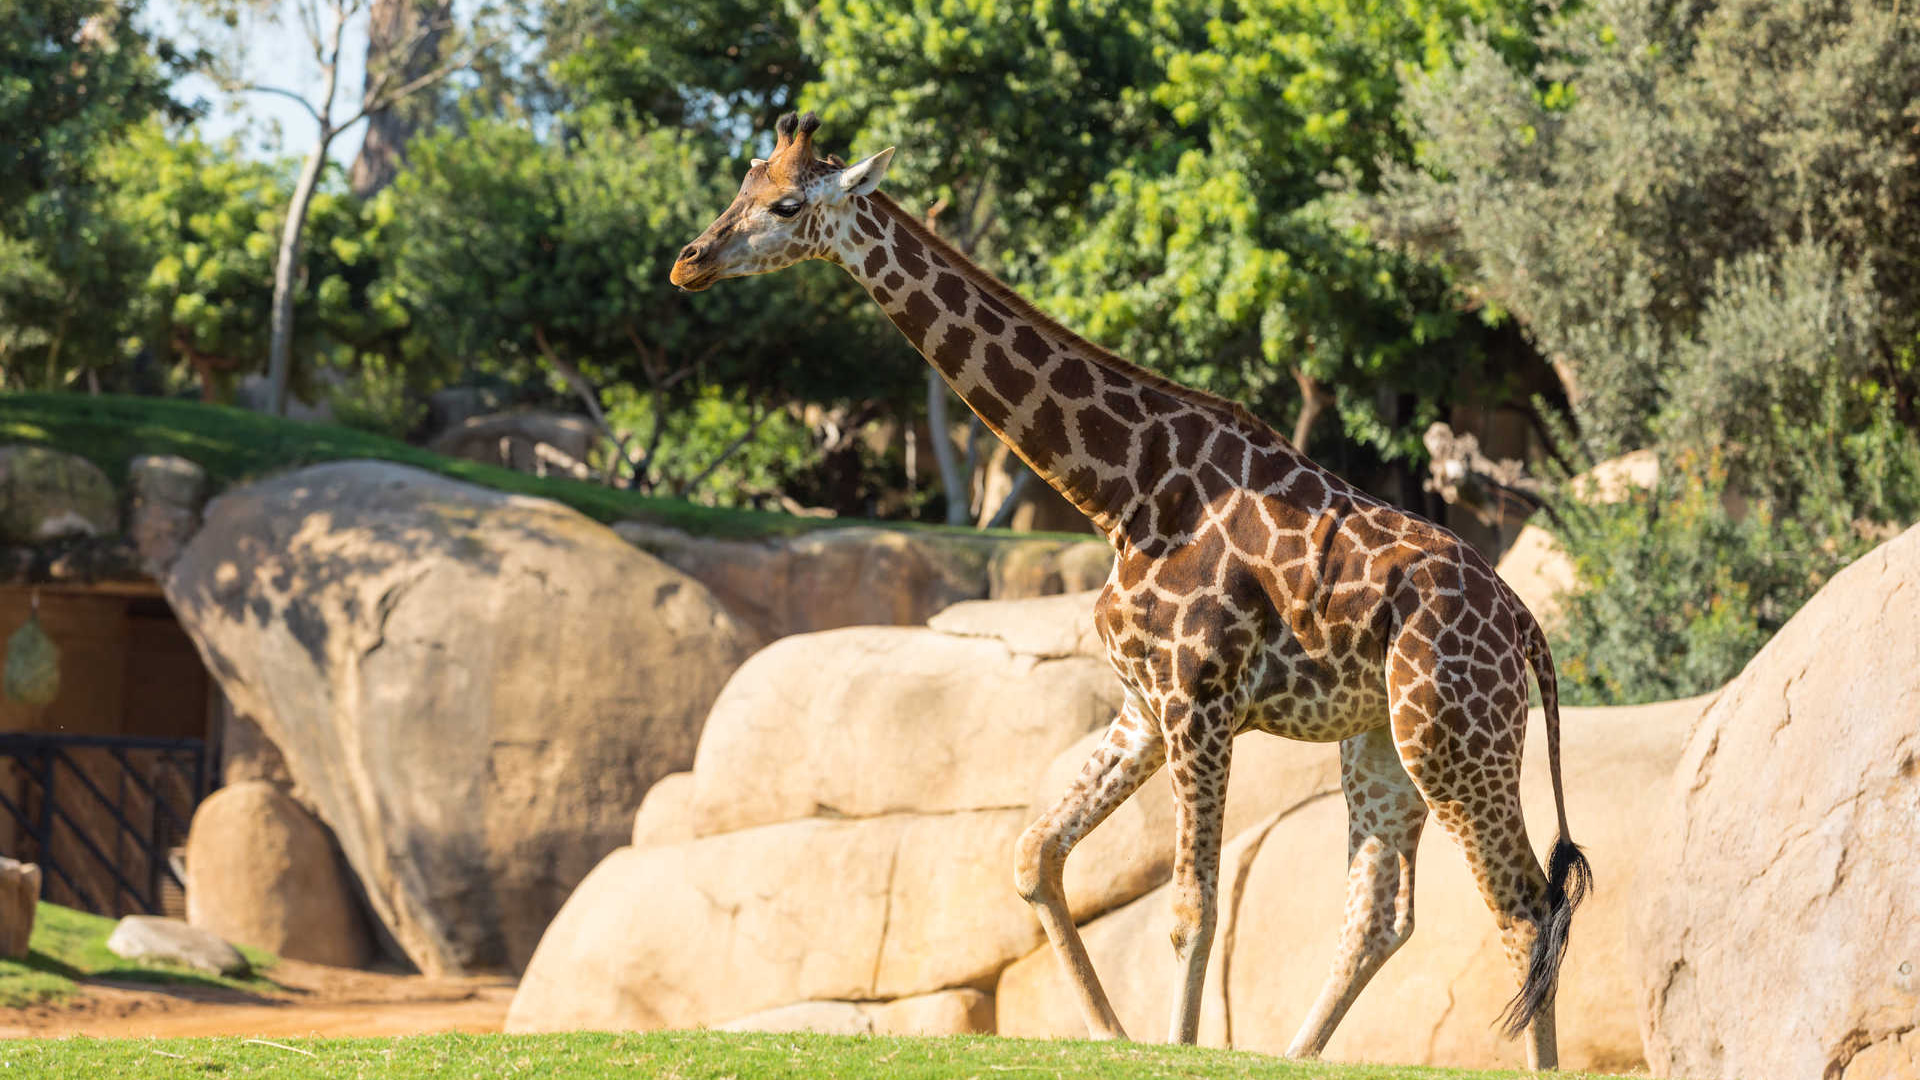 Bioparc Valencia: Travel to Africa without leaving the city